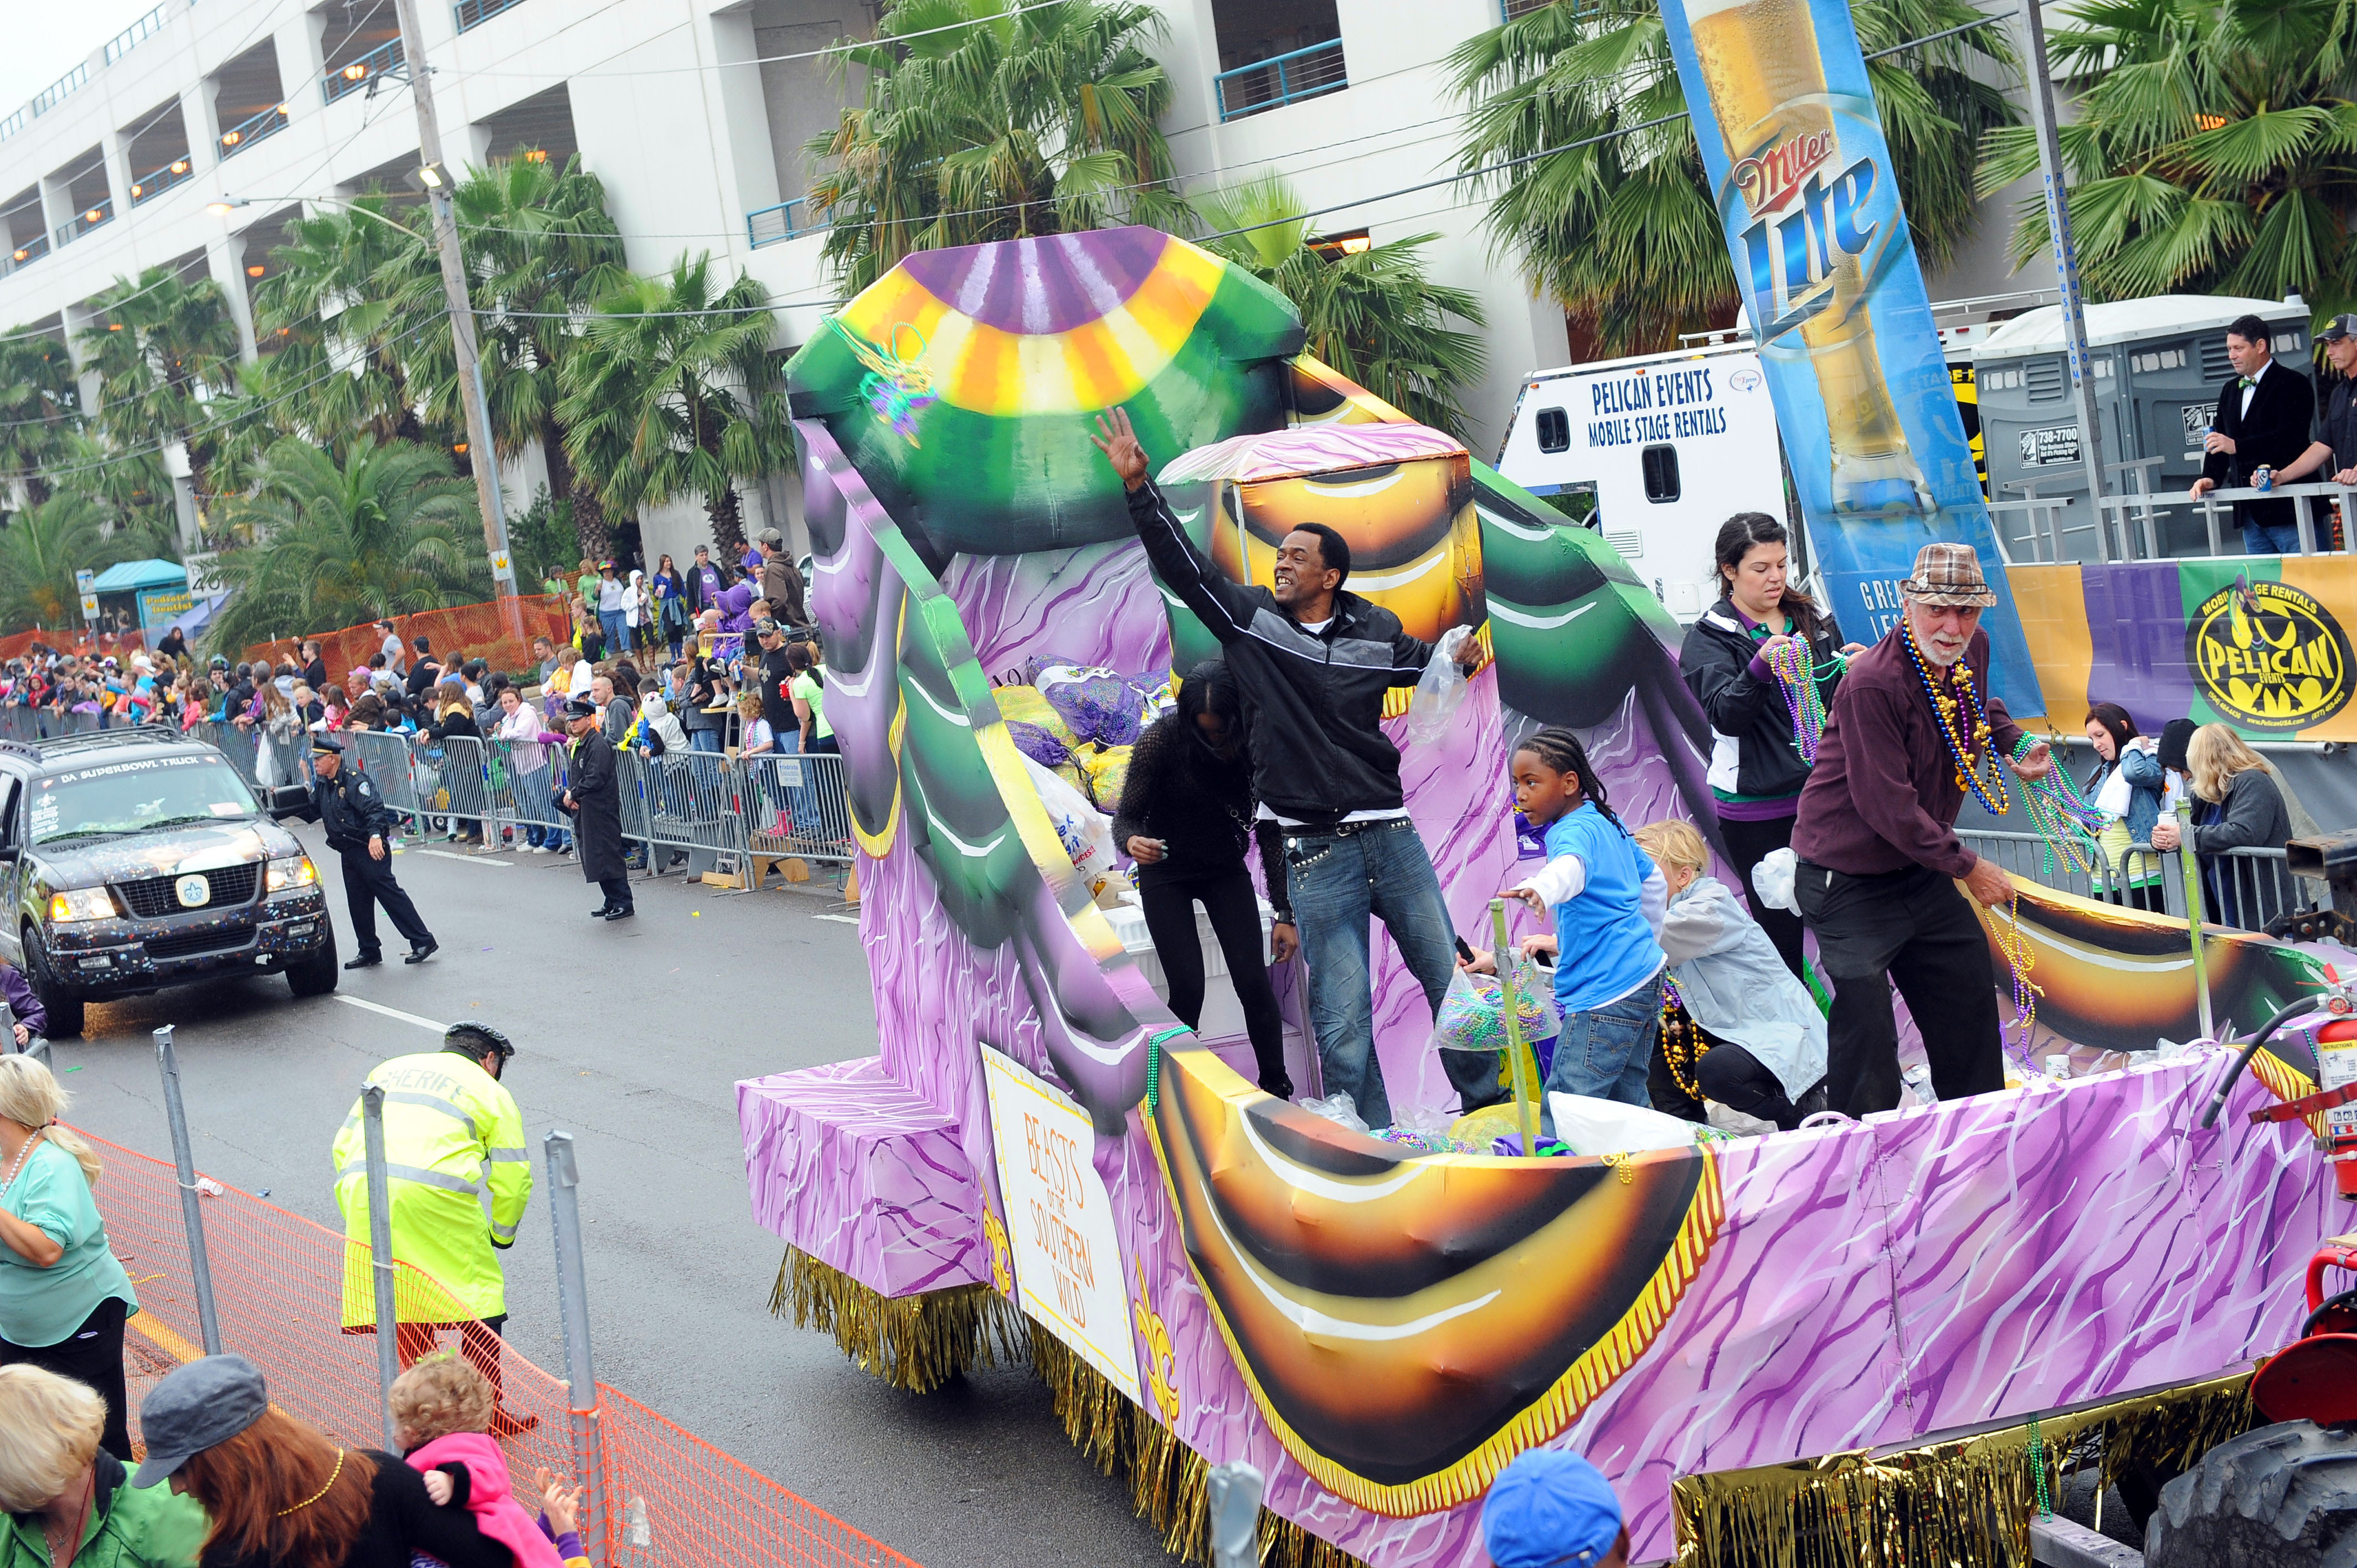 Metairie Parade Schedule 2022 Jefferson Parish Releases Parade Schedule For Carnival 2022; See Details –  Nola Weekend